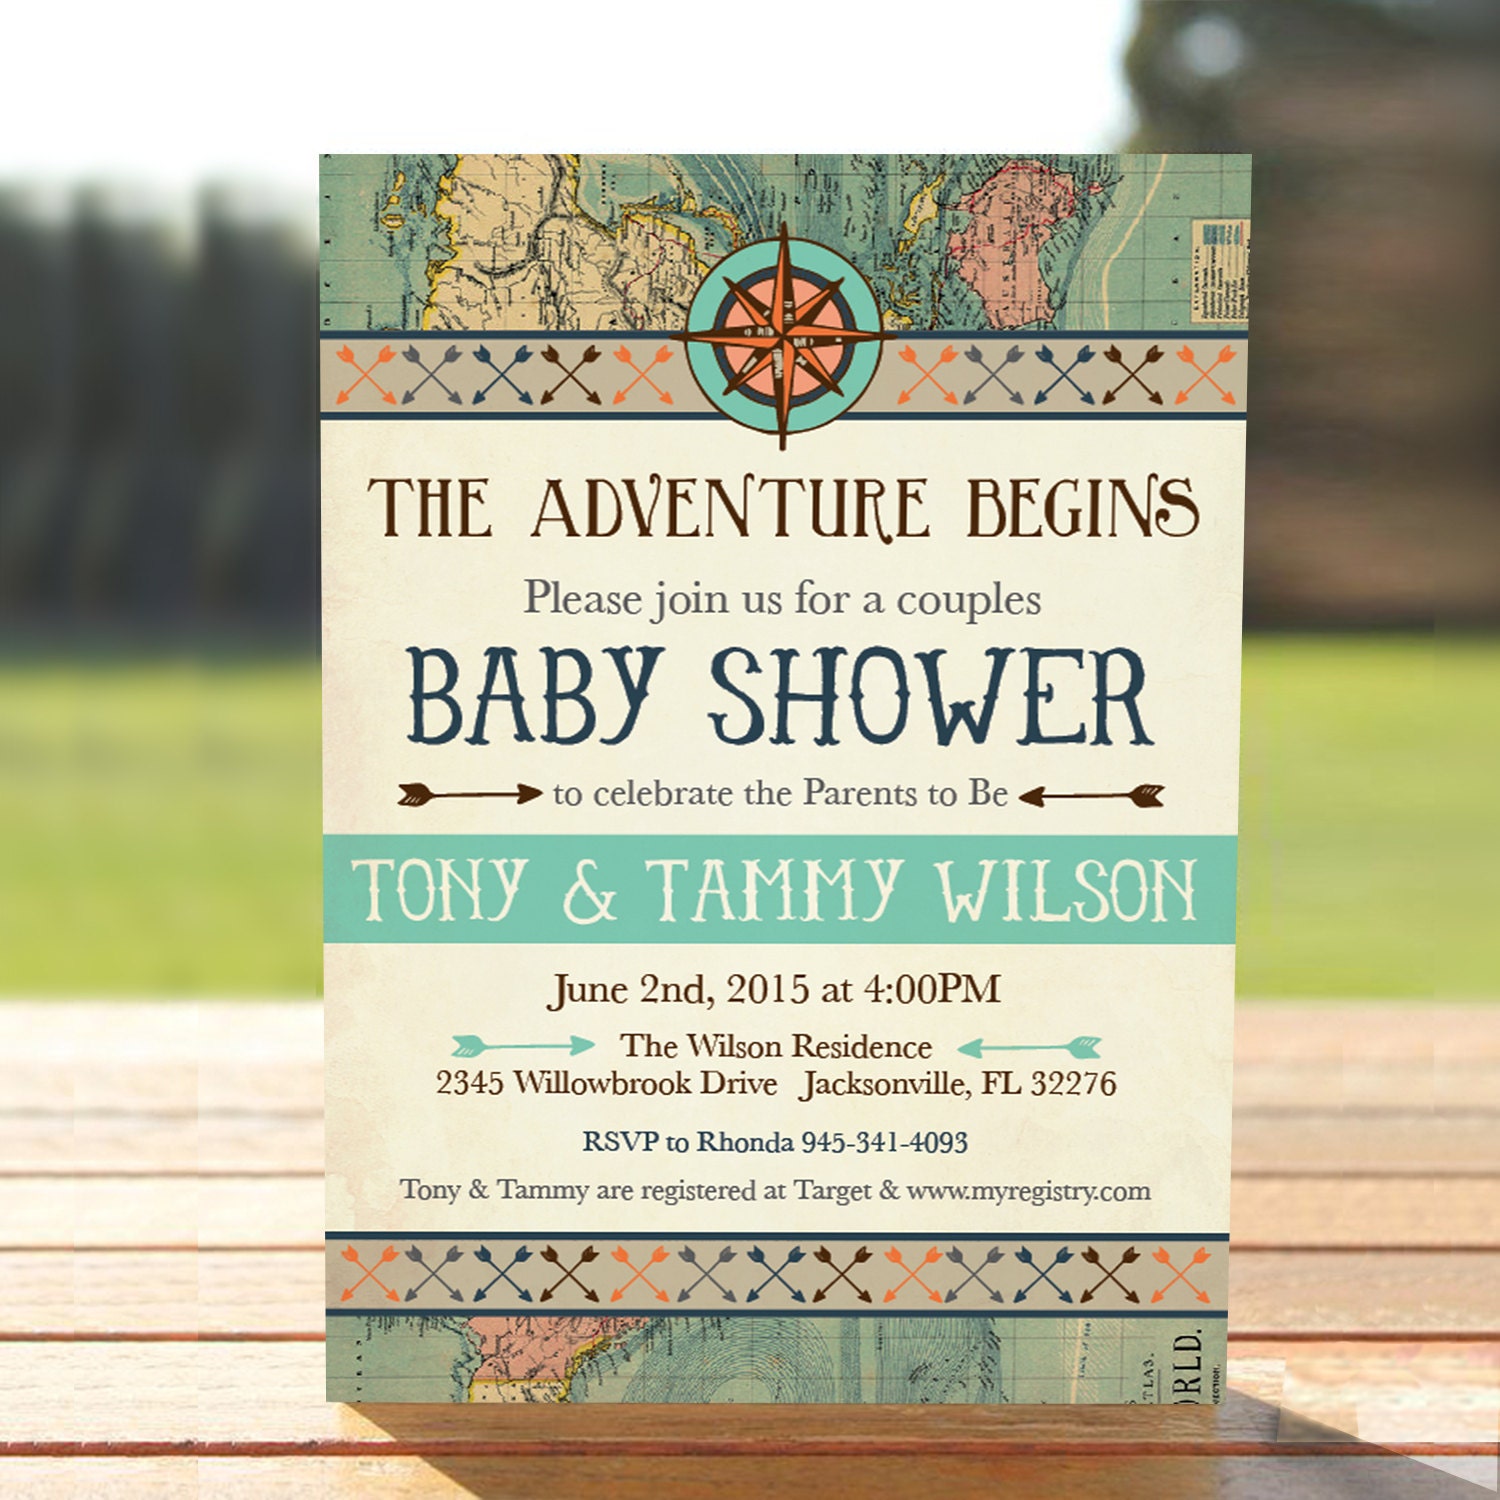 Baby Shower Couples Invitations / Unique Indian Baby Shower Invitations from #Soulfulmoon